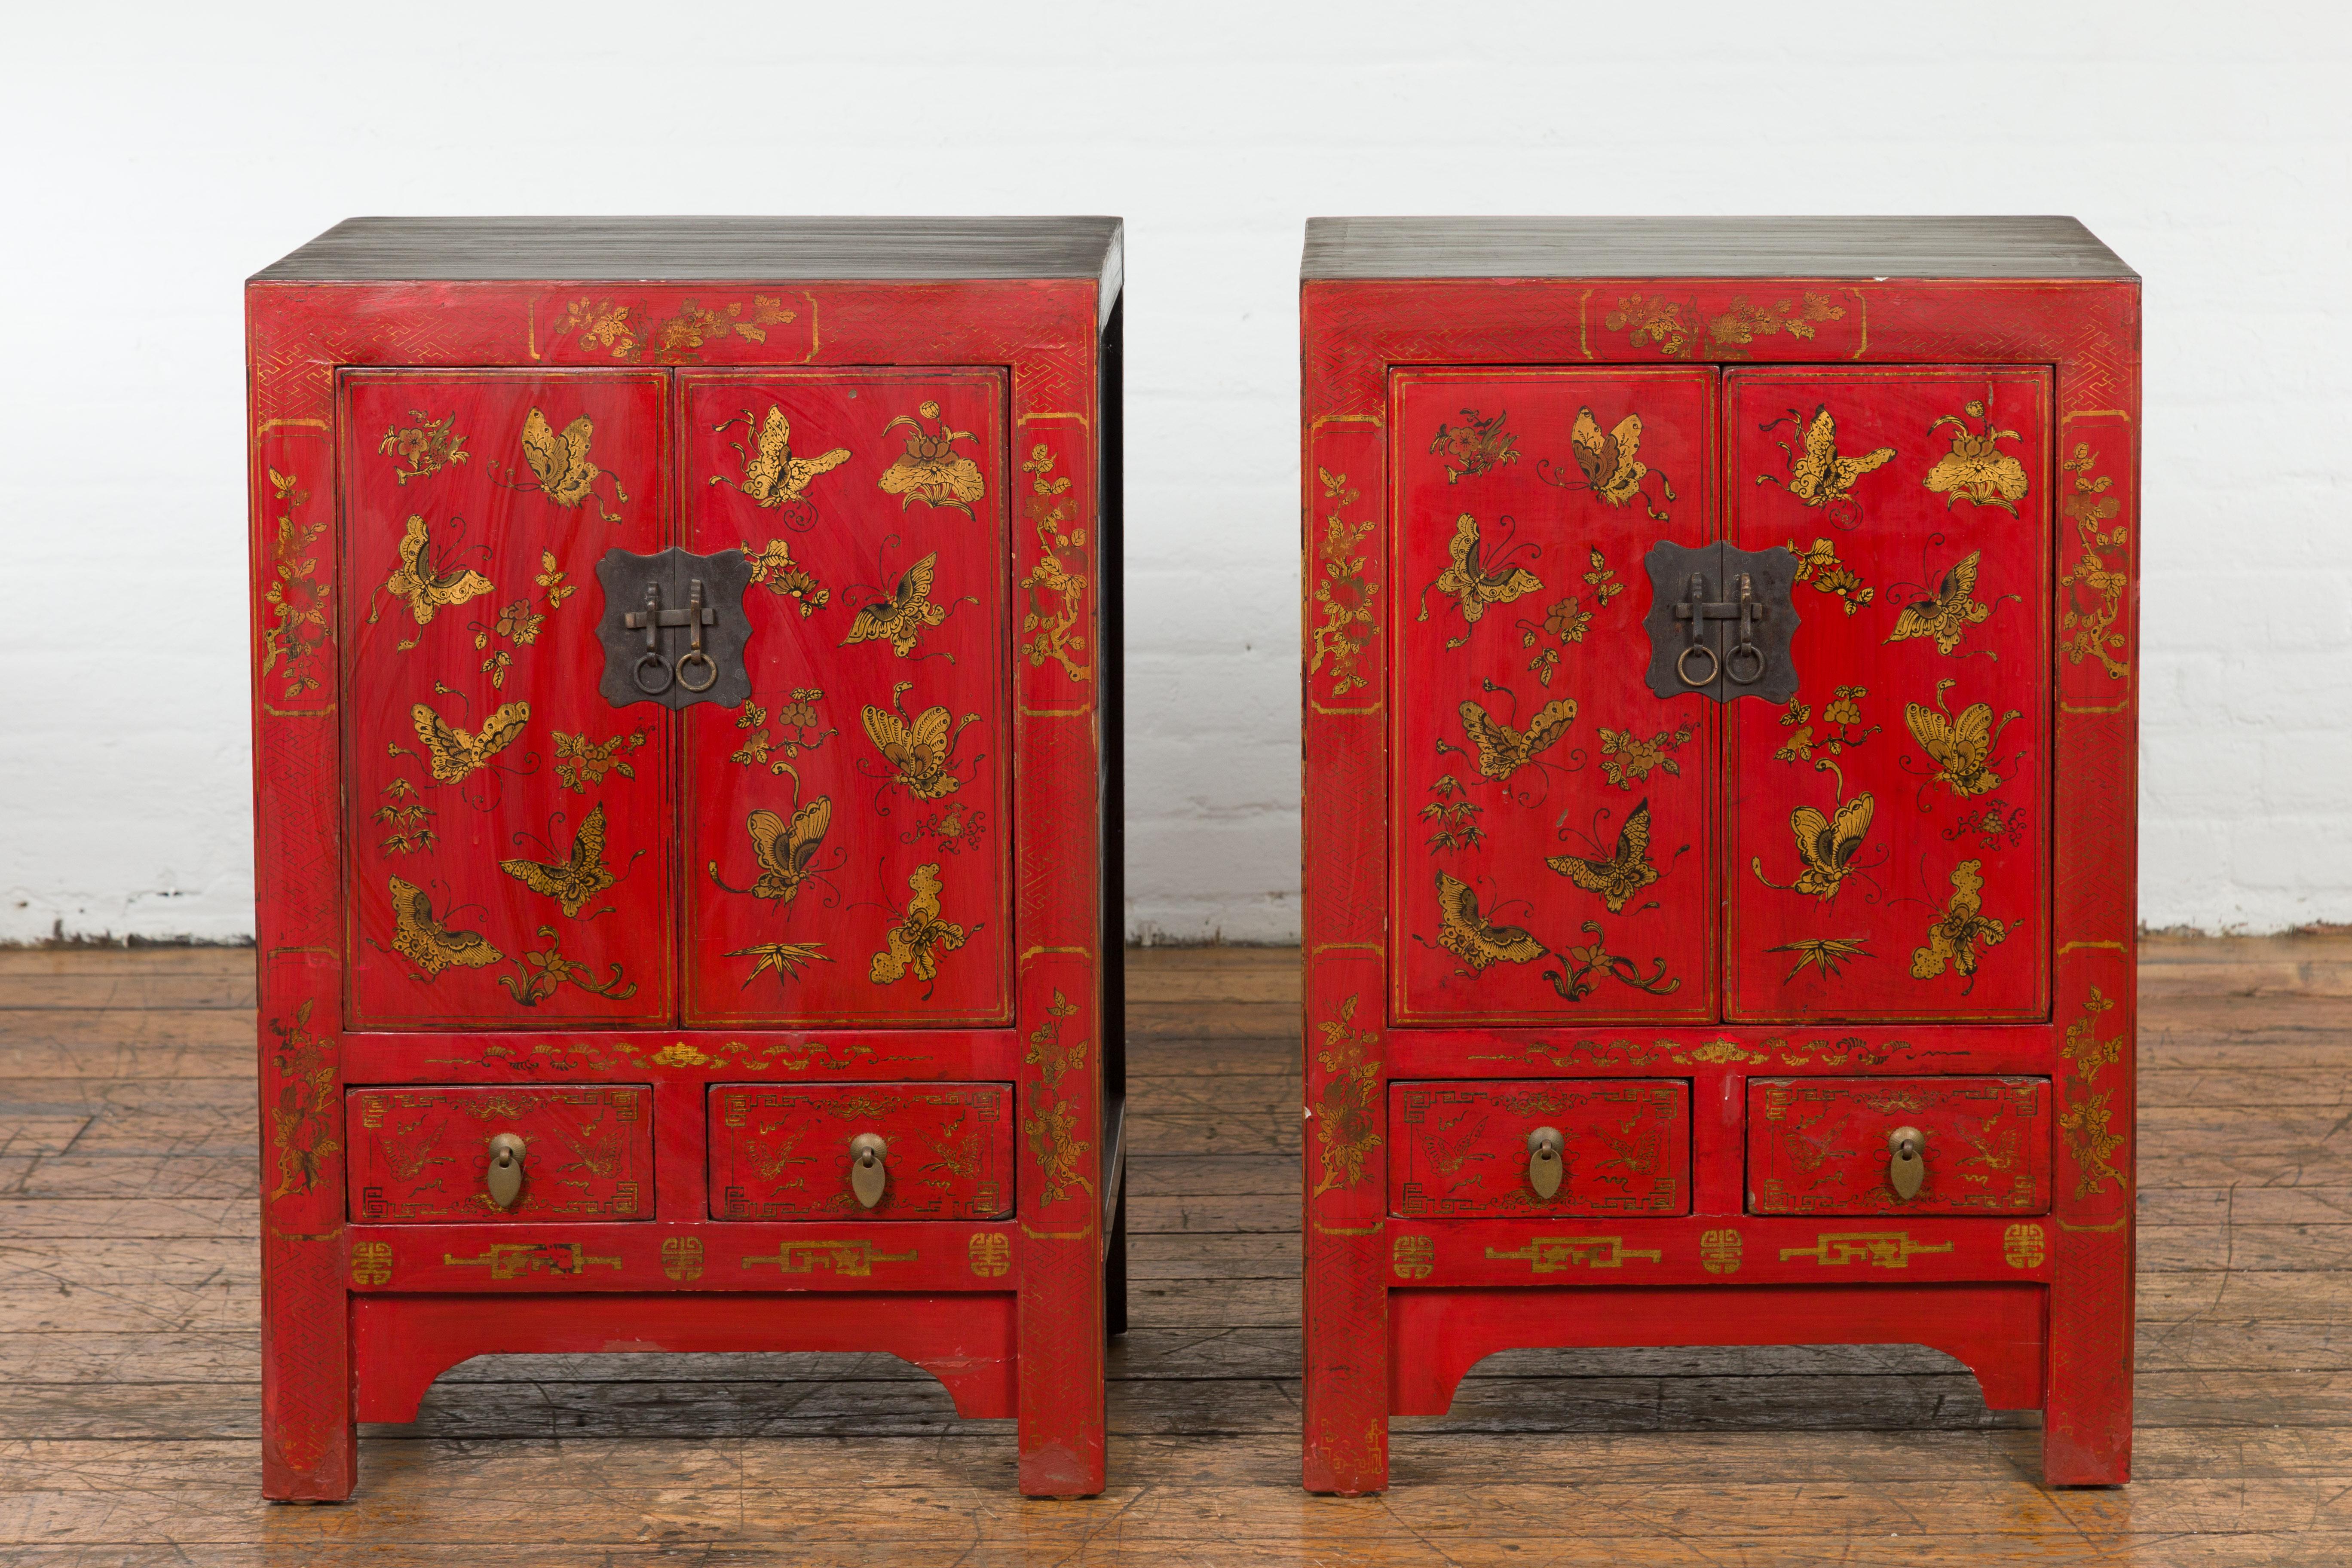 A pair of Chinese Qing Dynasty period red lacquer bedside cabinets from the 19th century, with hand painted golden butterfly and floral décor, two doors over two drawers. Created in China during the Qing Dynasty period in the 19th century, each of